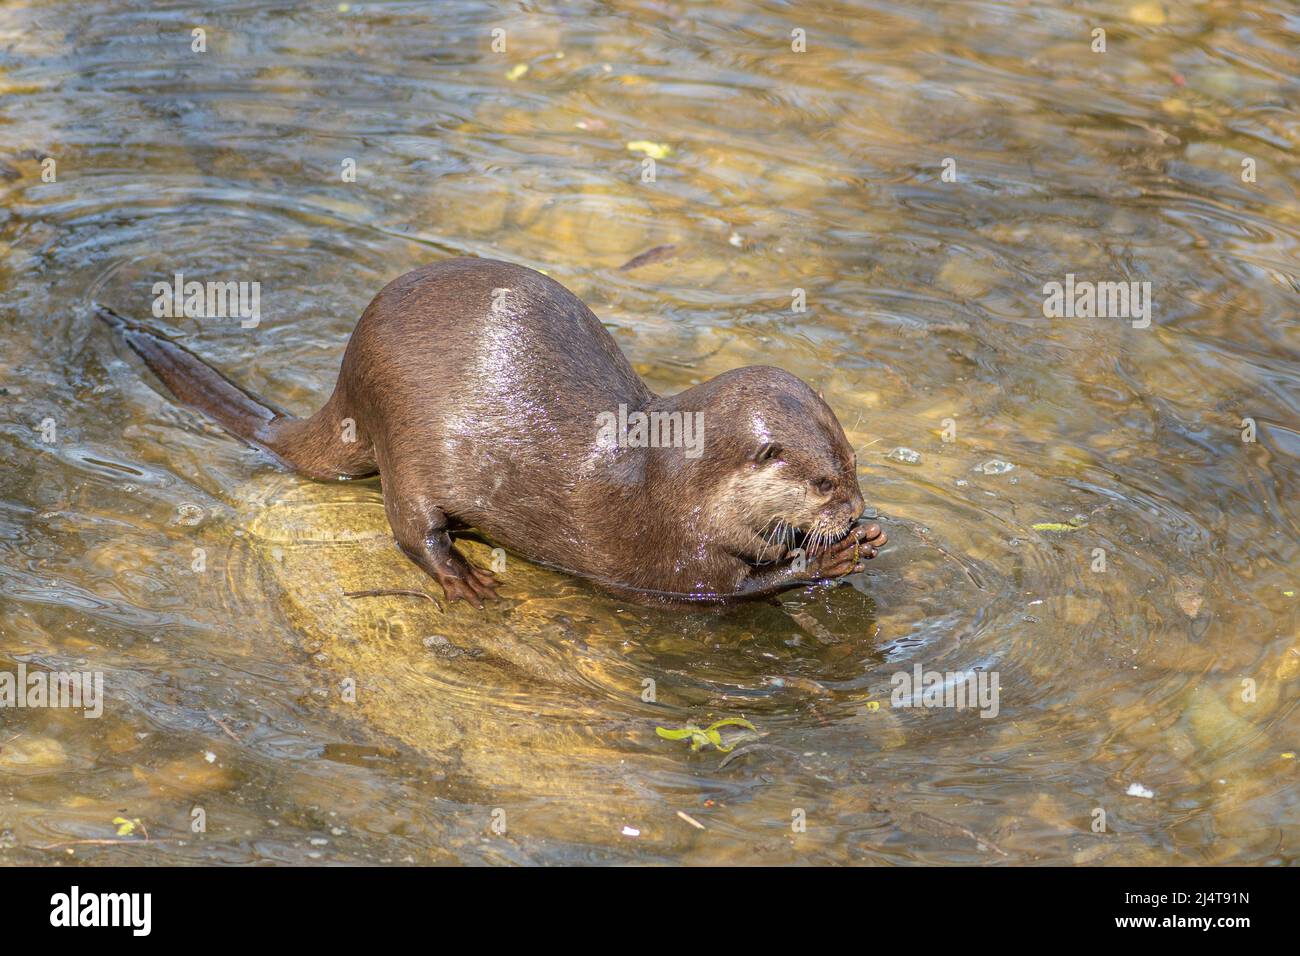 Otter in the water, carnivorous mammals in the subfamily Lutrinae. Semiaquatic, aquatic or marine, with diets based on fish and invertebrates, closeup Stock Photo